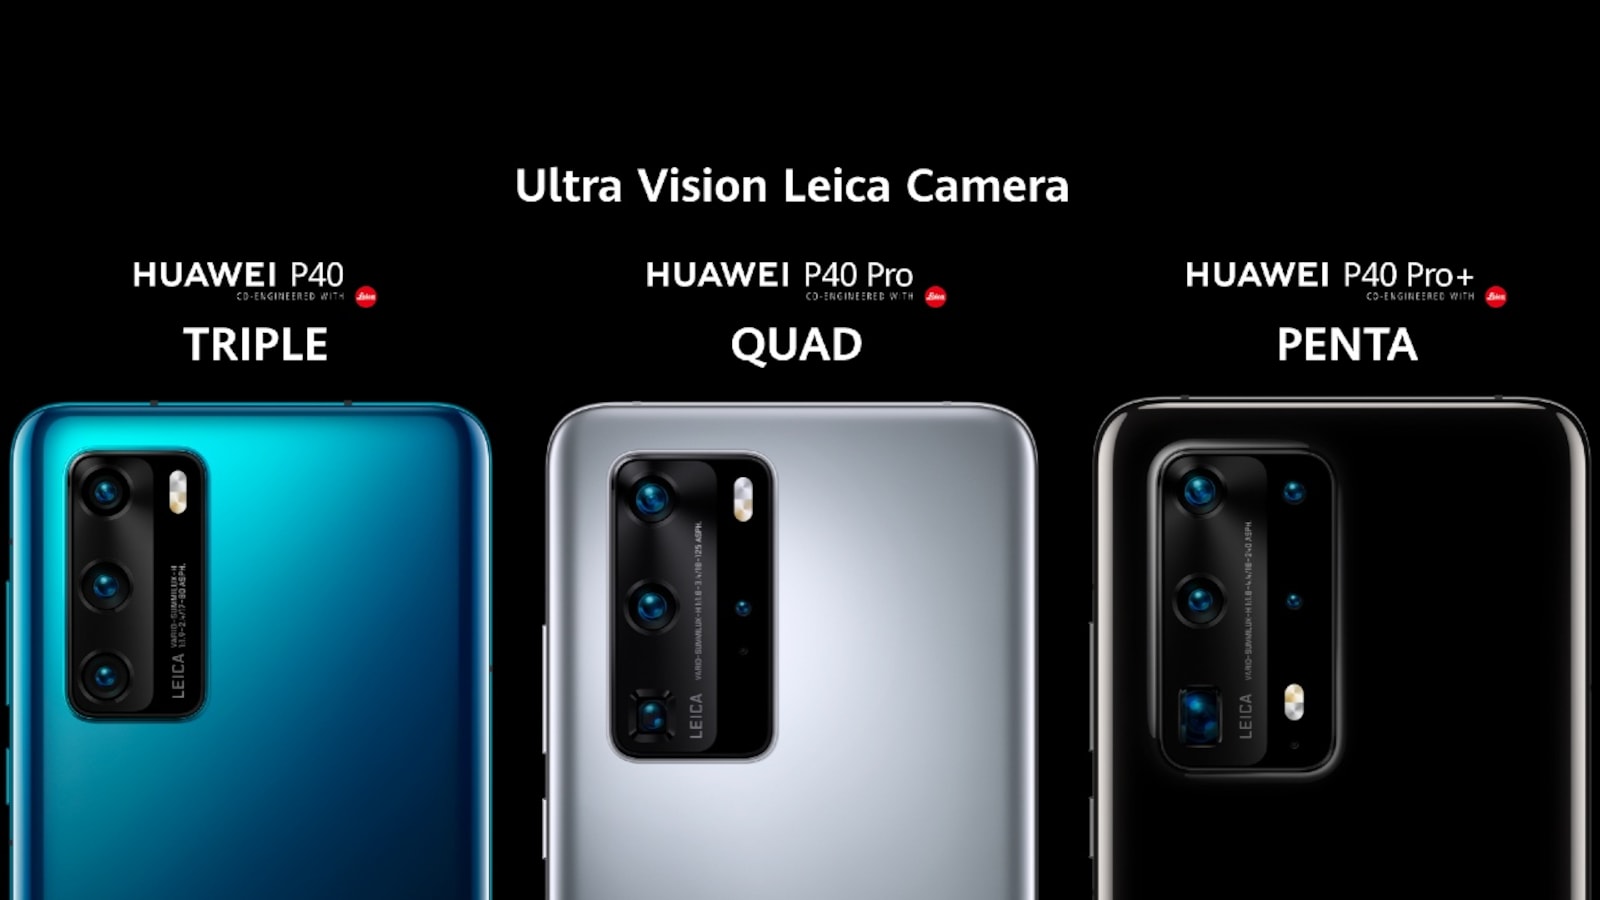 Huawei P40 Pro 5G - Price in India, Specifications, Comparison (27th  February 2024)